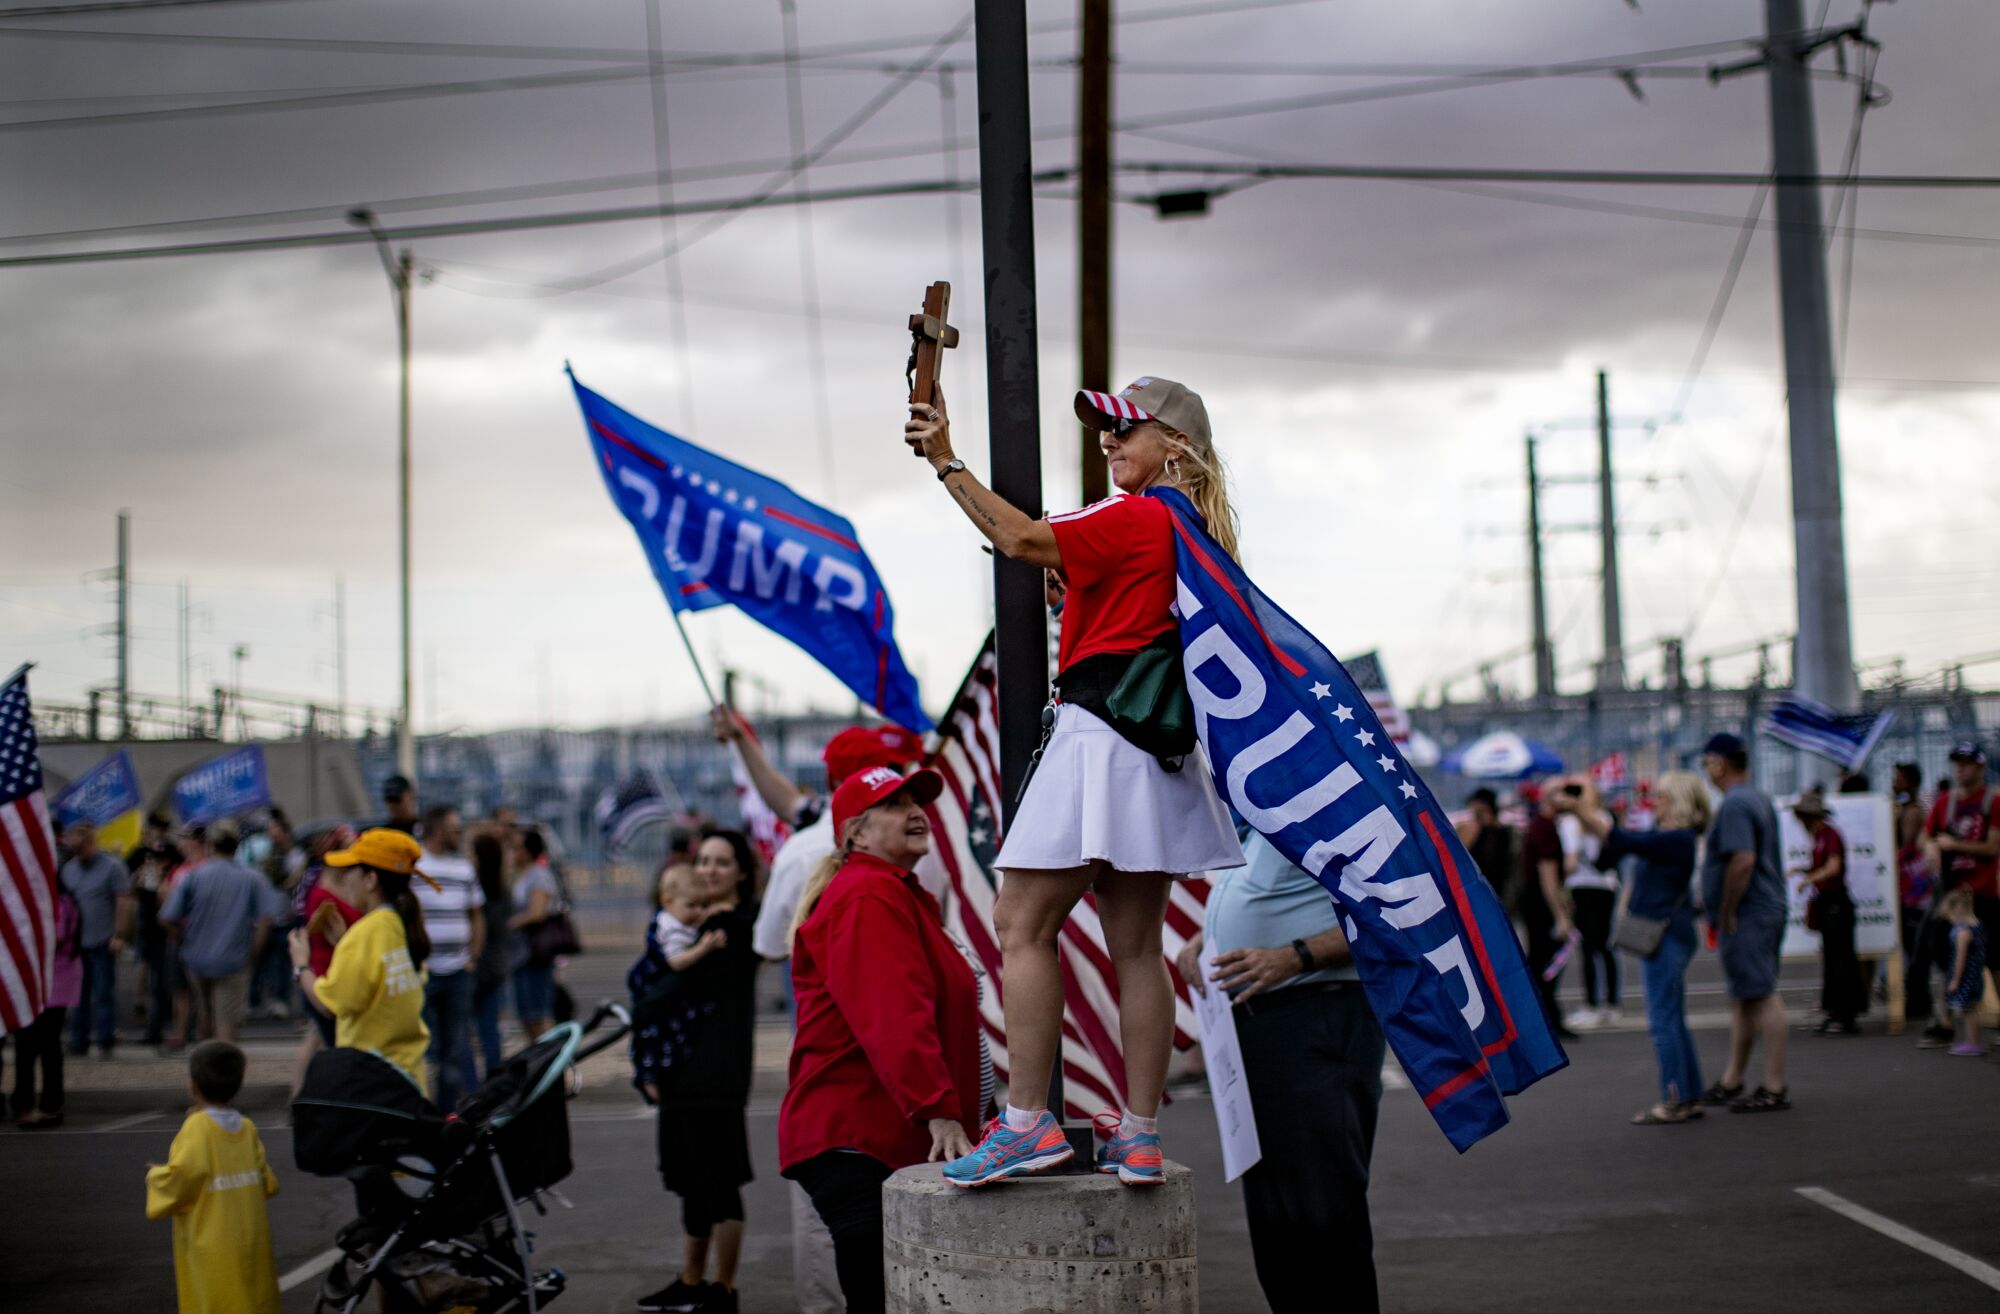 As storm clouds move in, a woman covered in Trump flags holds up a cross at a rally in Phoenix.